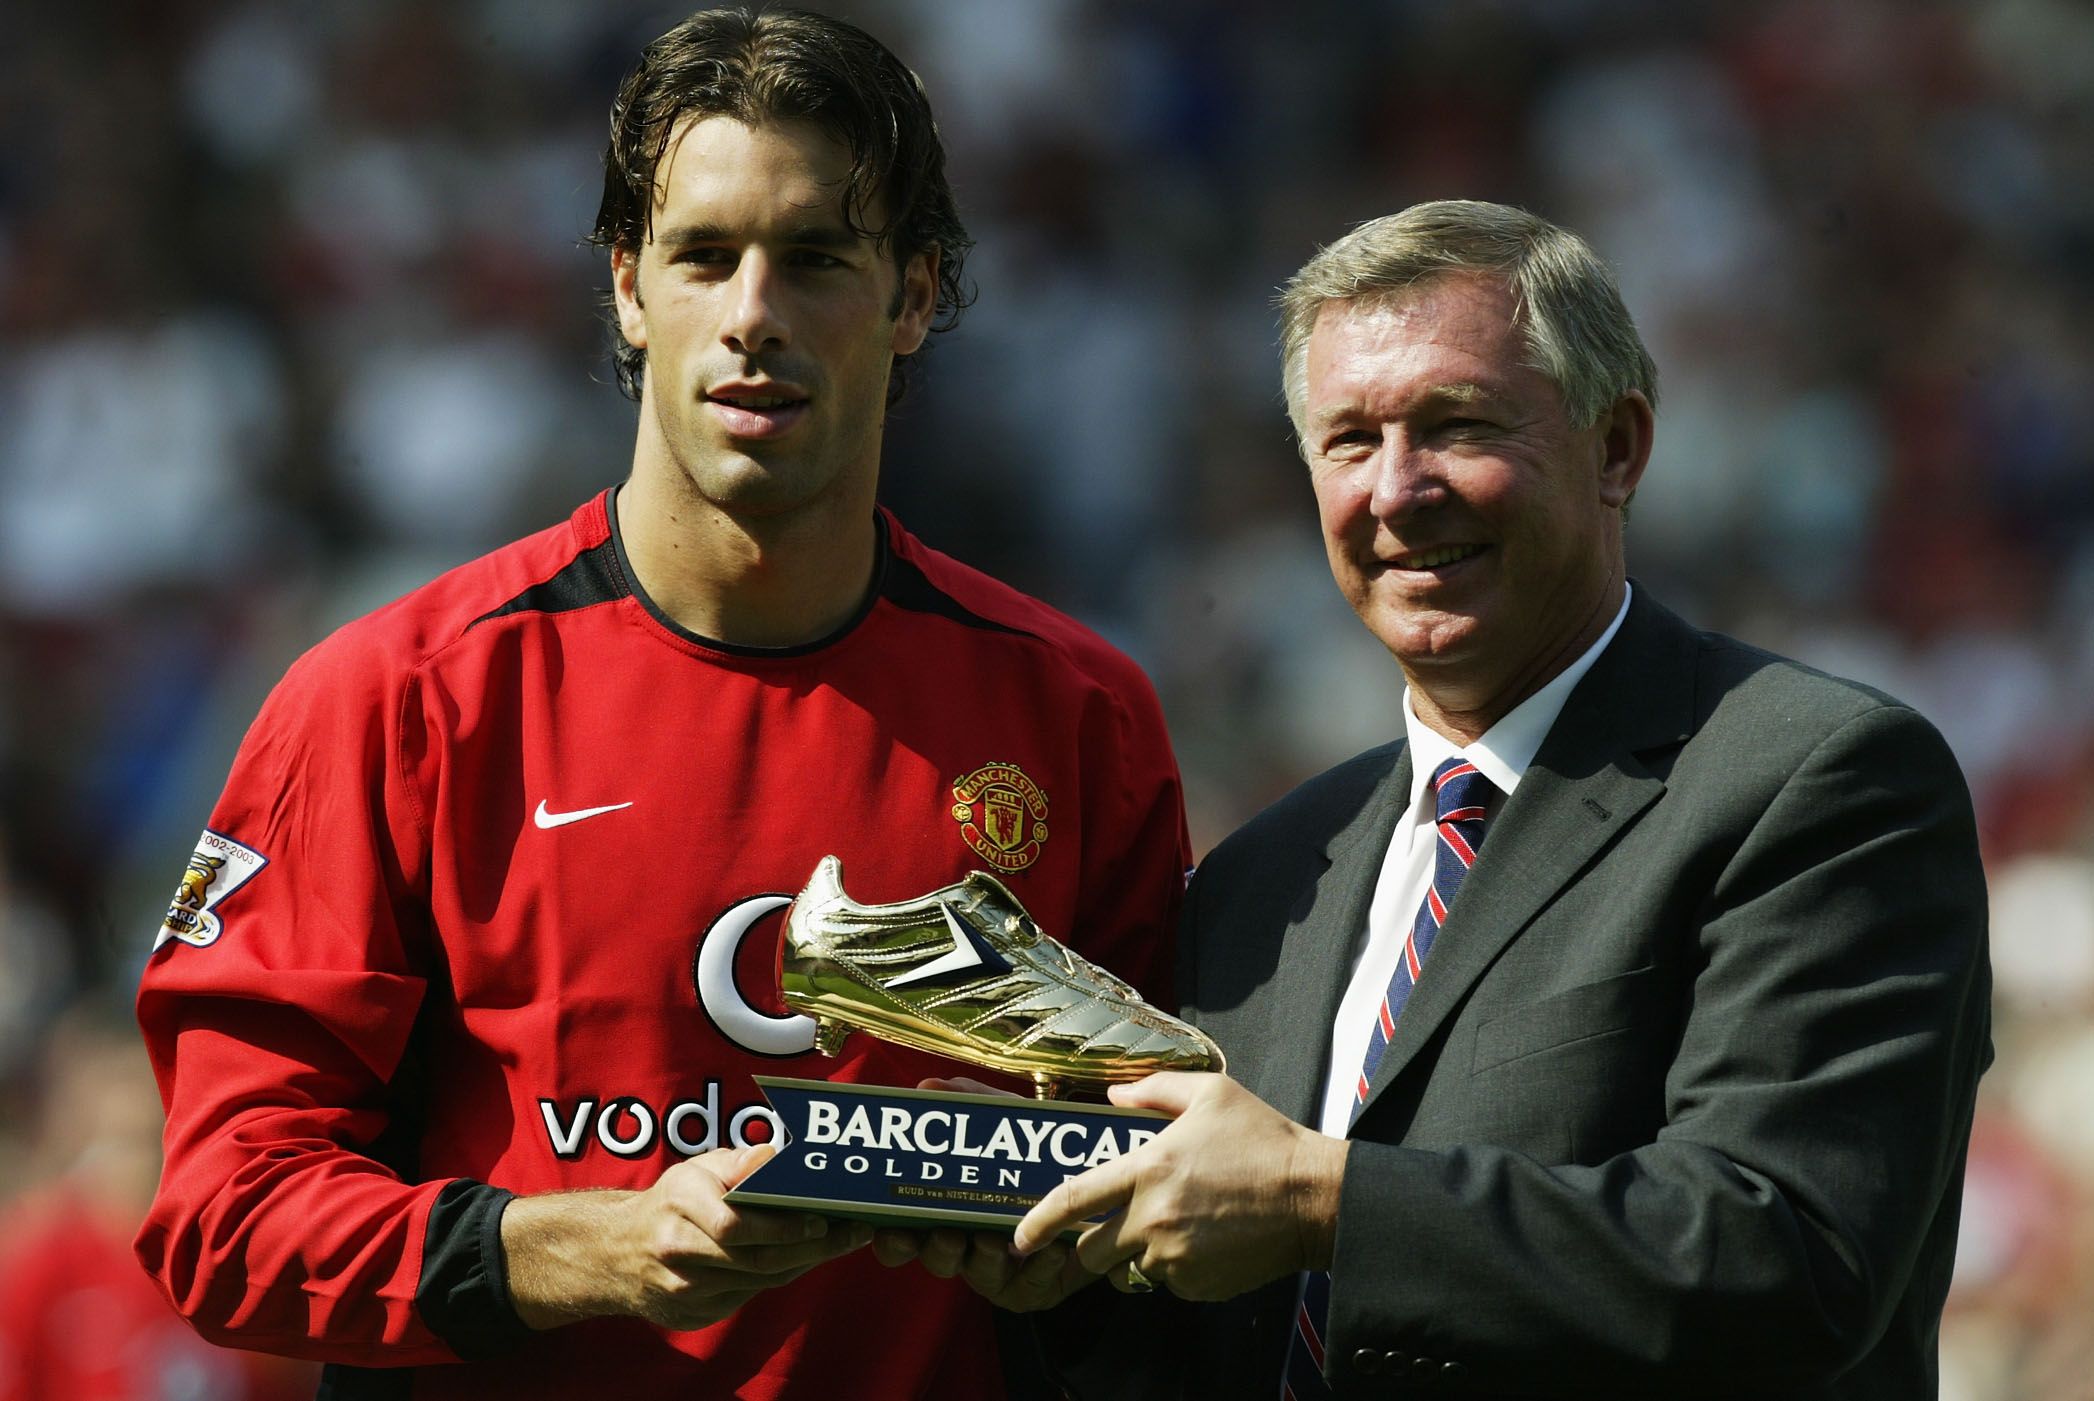 &quot;The end was ruthless&quot; - Ruud van Nistelrooy on the incident that